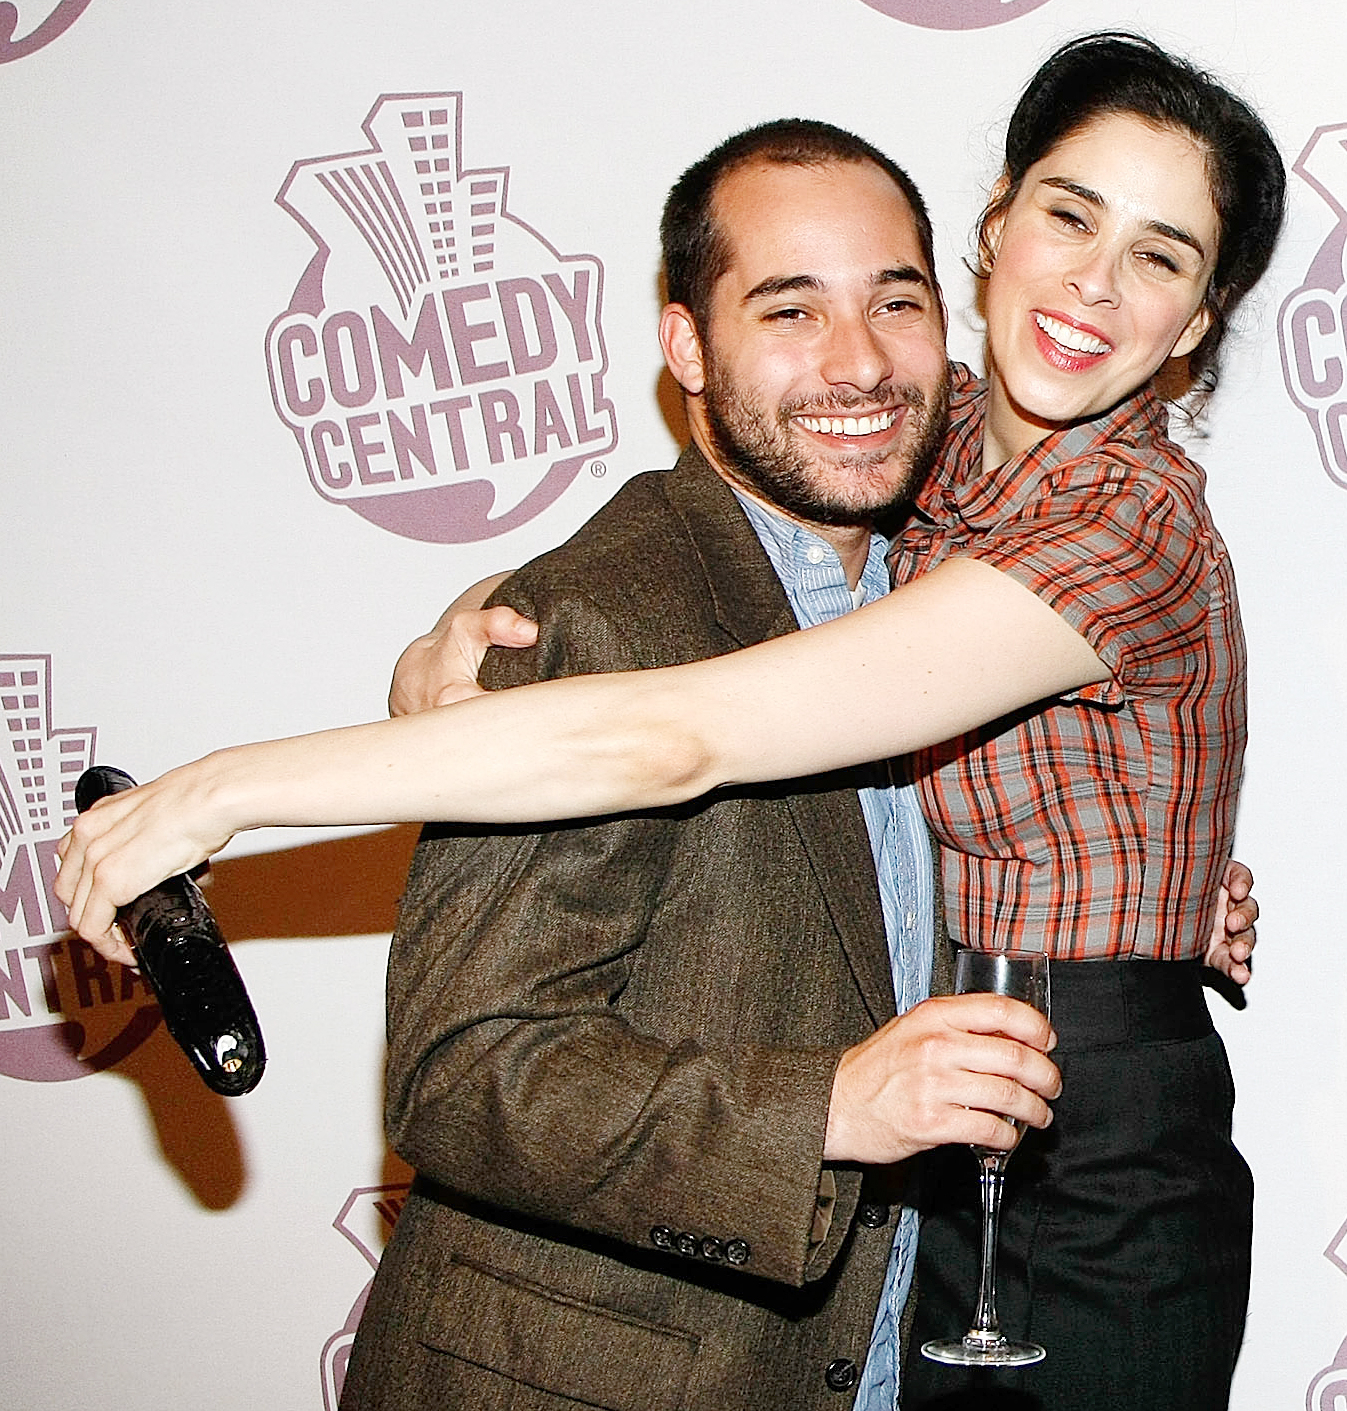 Harris Wittels’ Mom Opens Up About His Heroin Overdose Death